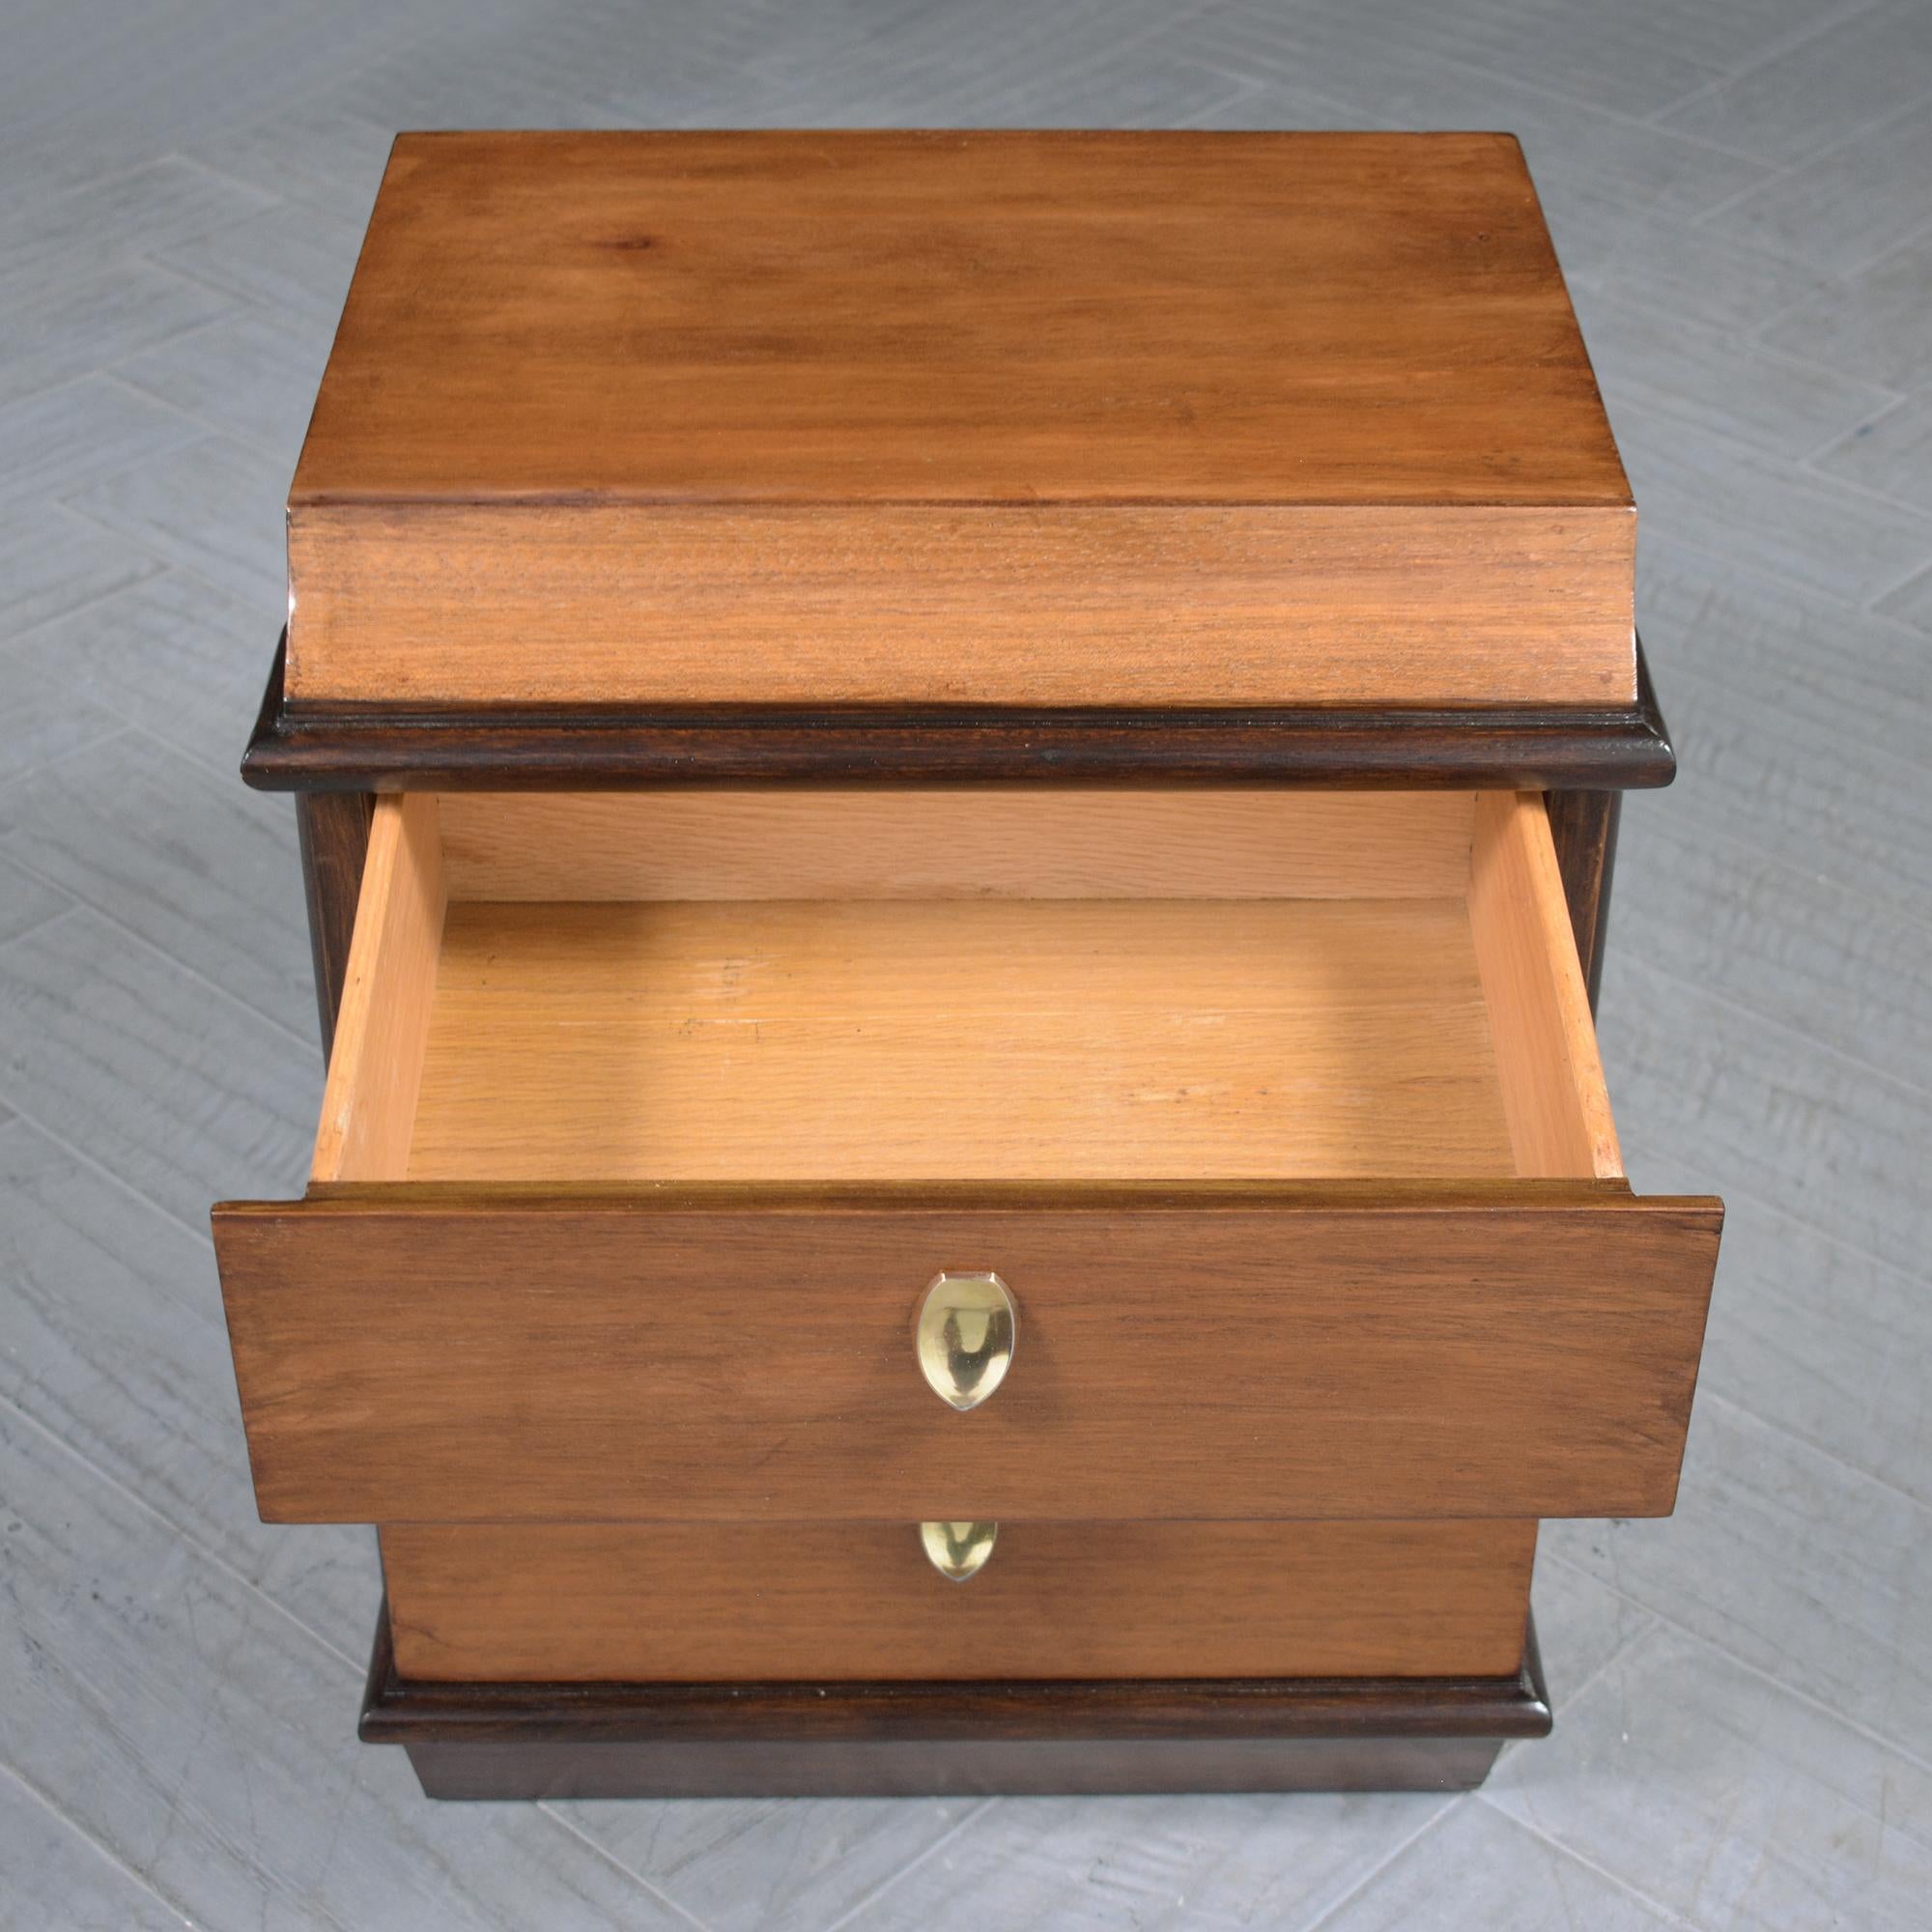 1960s Mid-Century Modern Walnut Nightstands - A Timeless Pair Restored For Sale 2